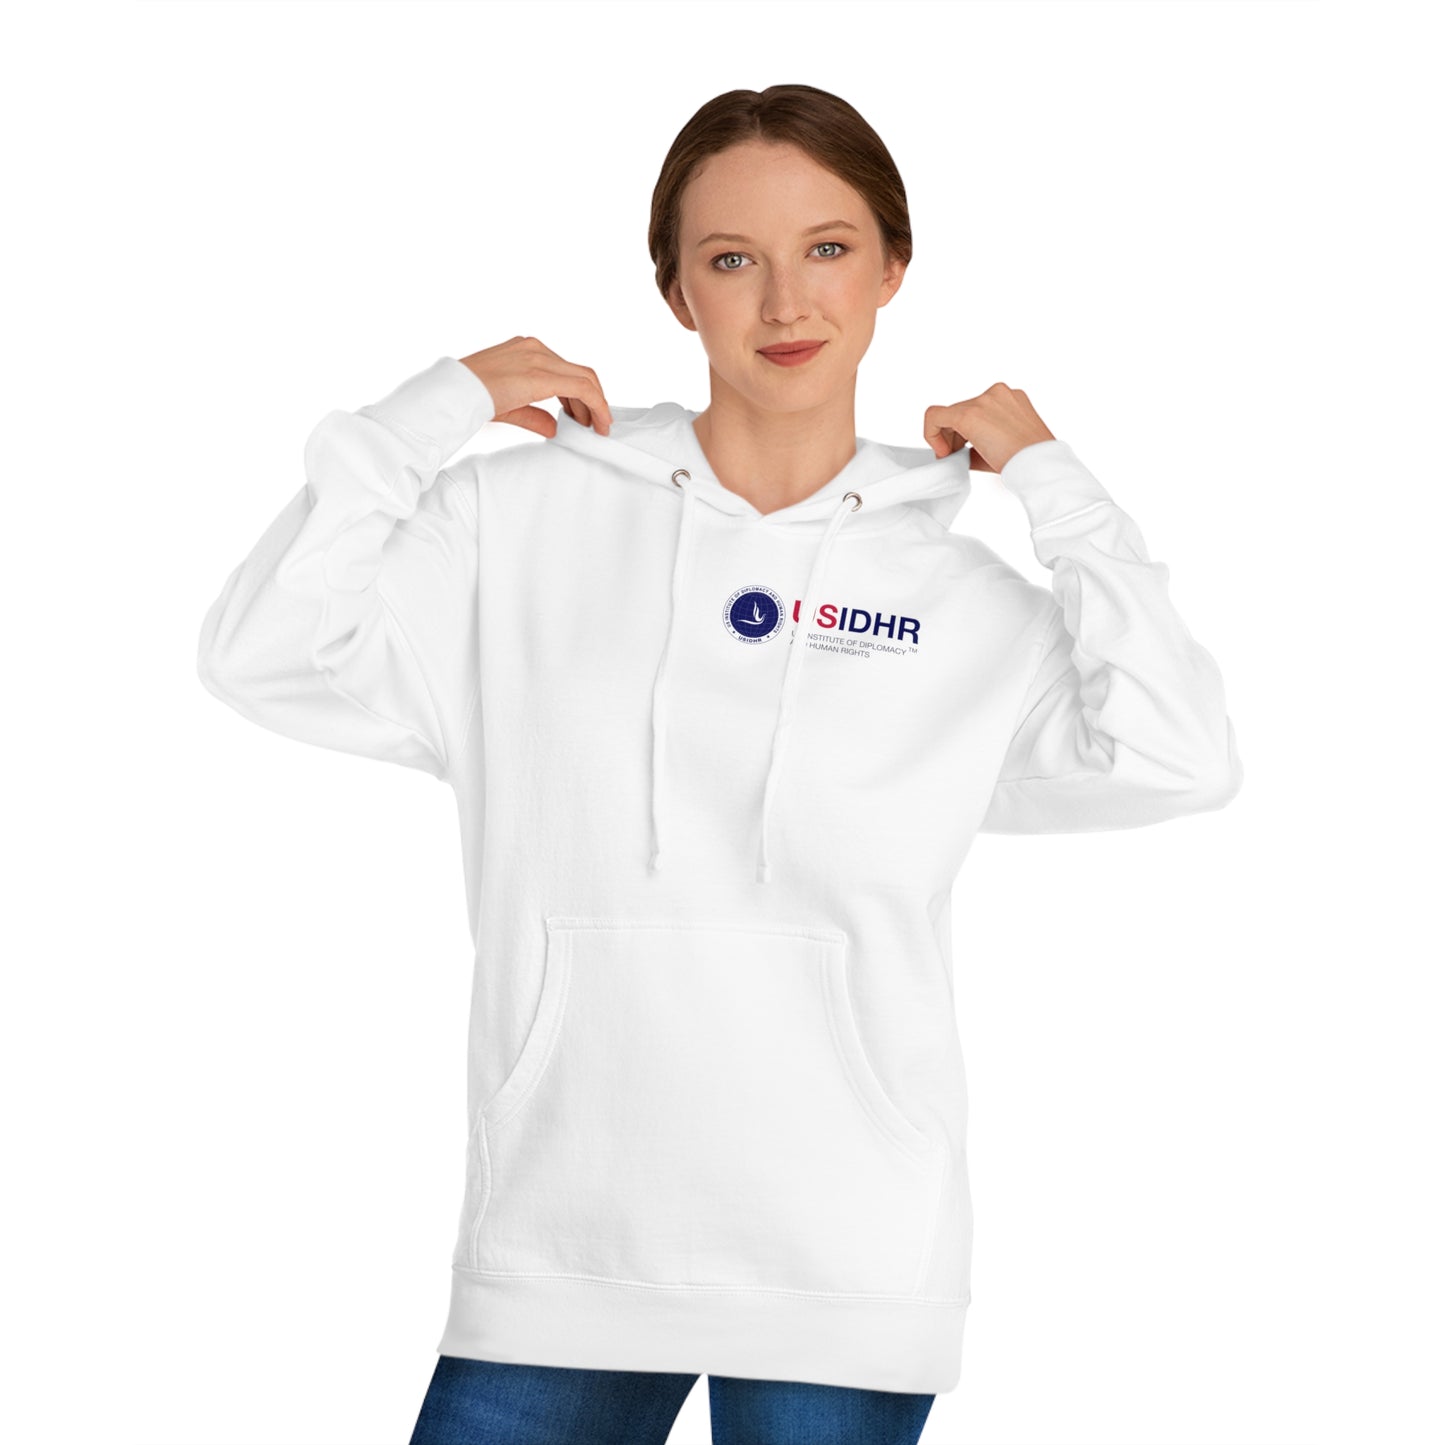 USIDHR Logo Hooded Cotton Sweatshirt for Relax time